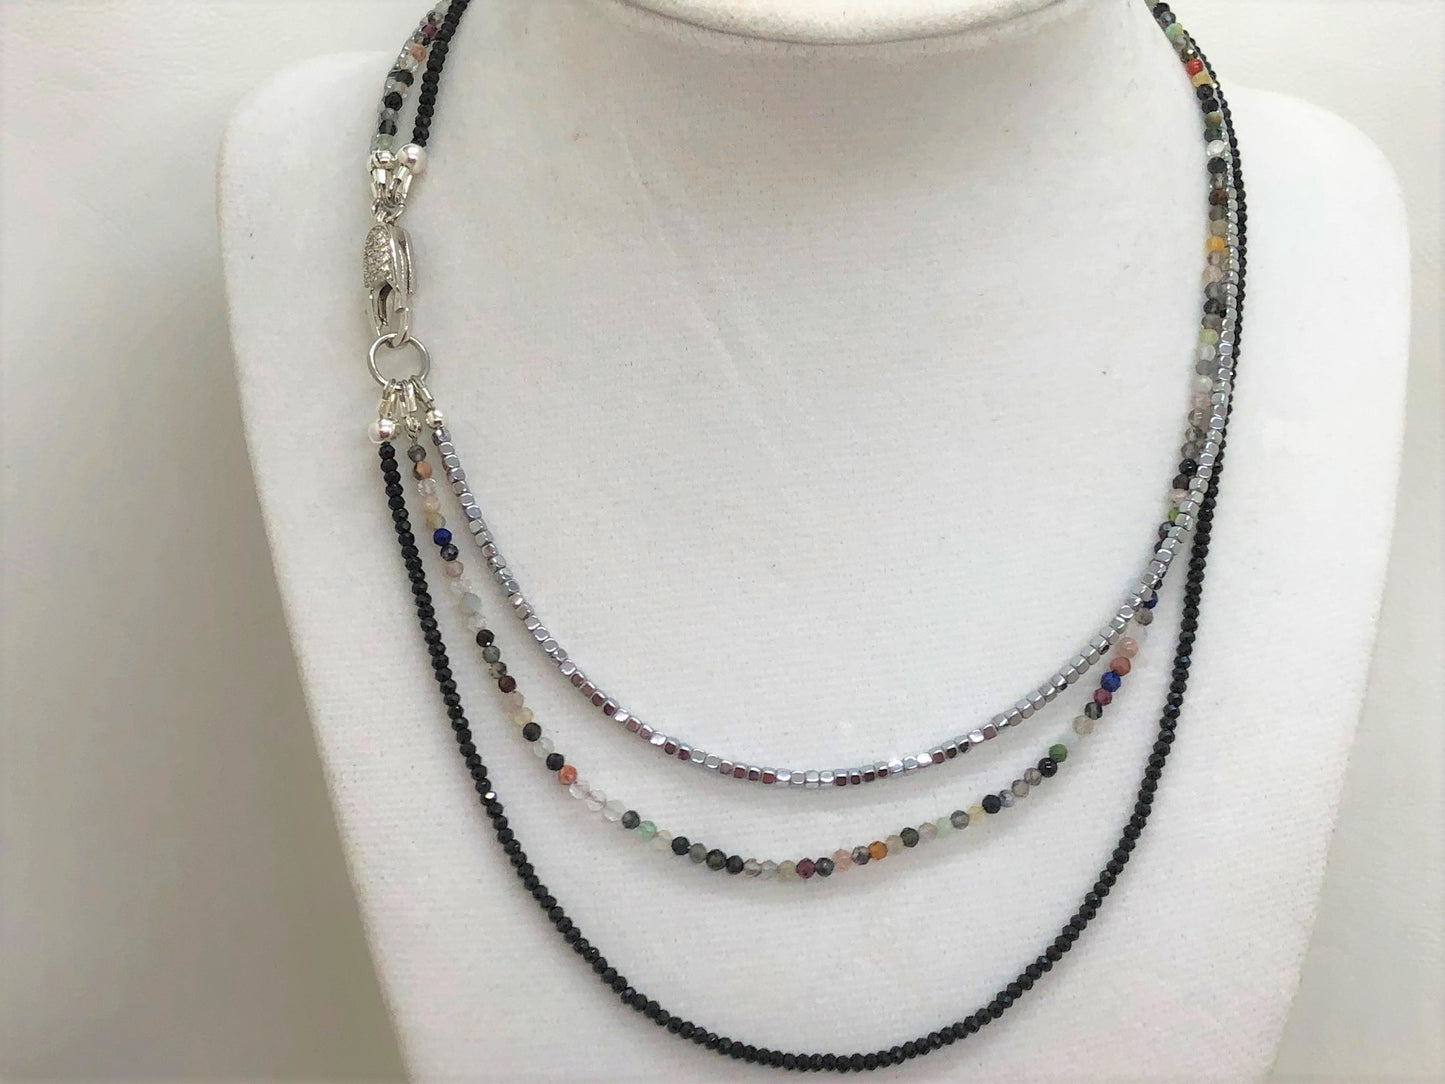 Triple Gemstone Short Necklace with Onyx, Mixed Quartz and Silver Hematite - Emmis Jewelry, Necklace, [product_color]